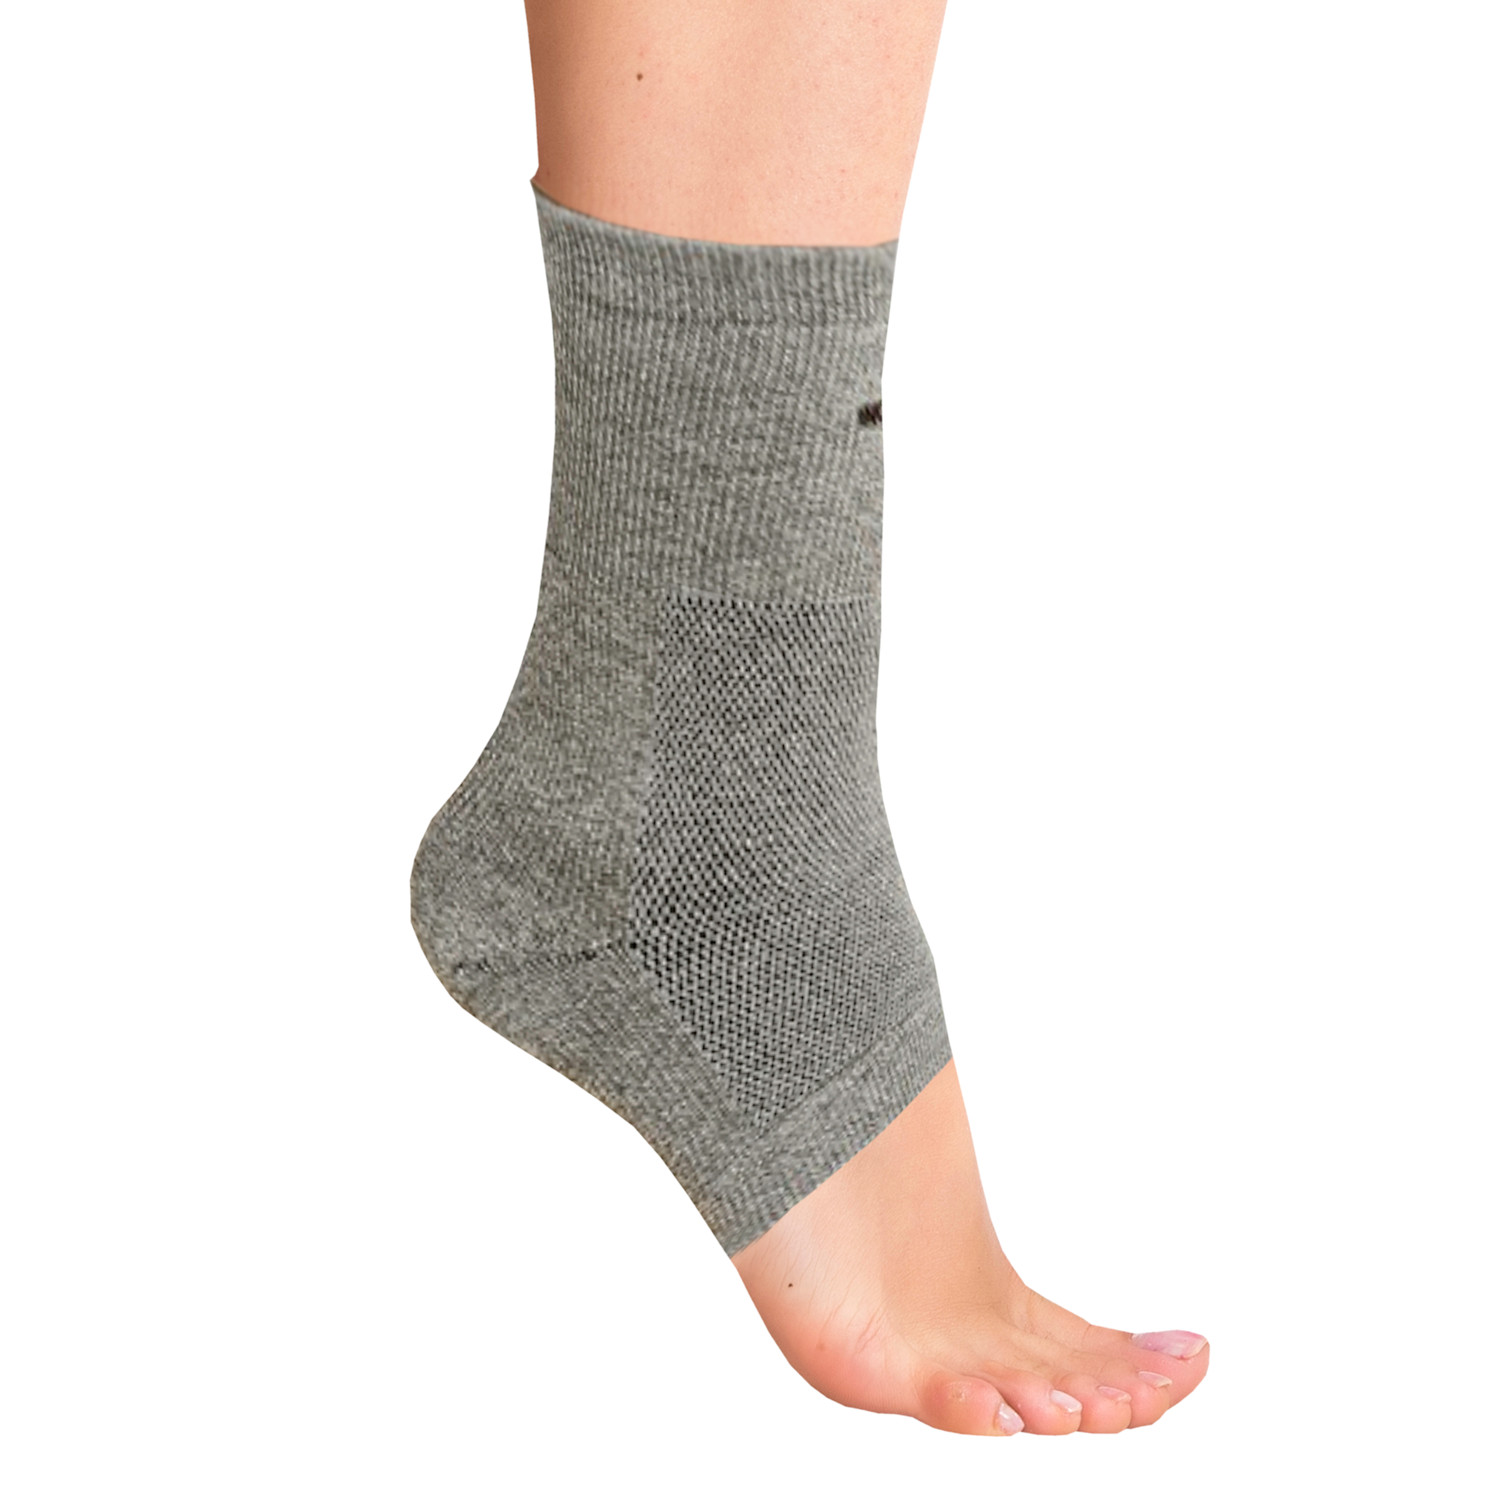 Incrediwear Ankle Sleeve | Support Plus